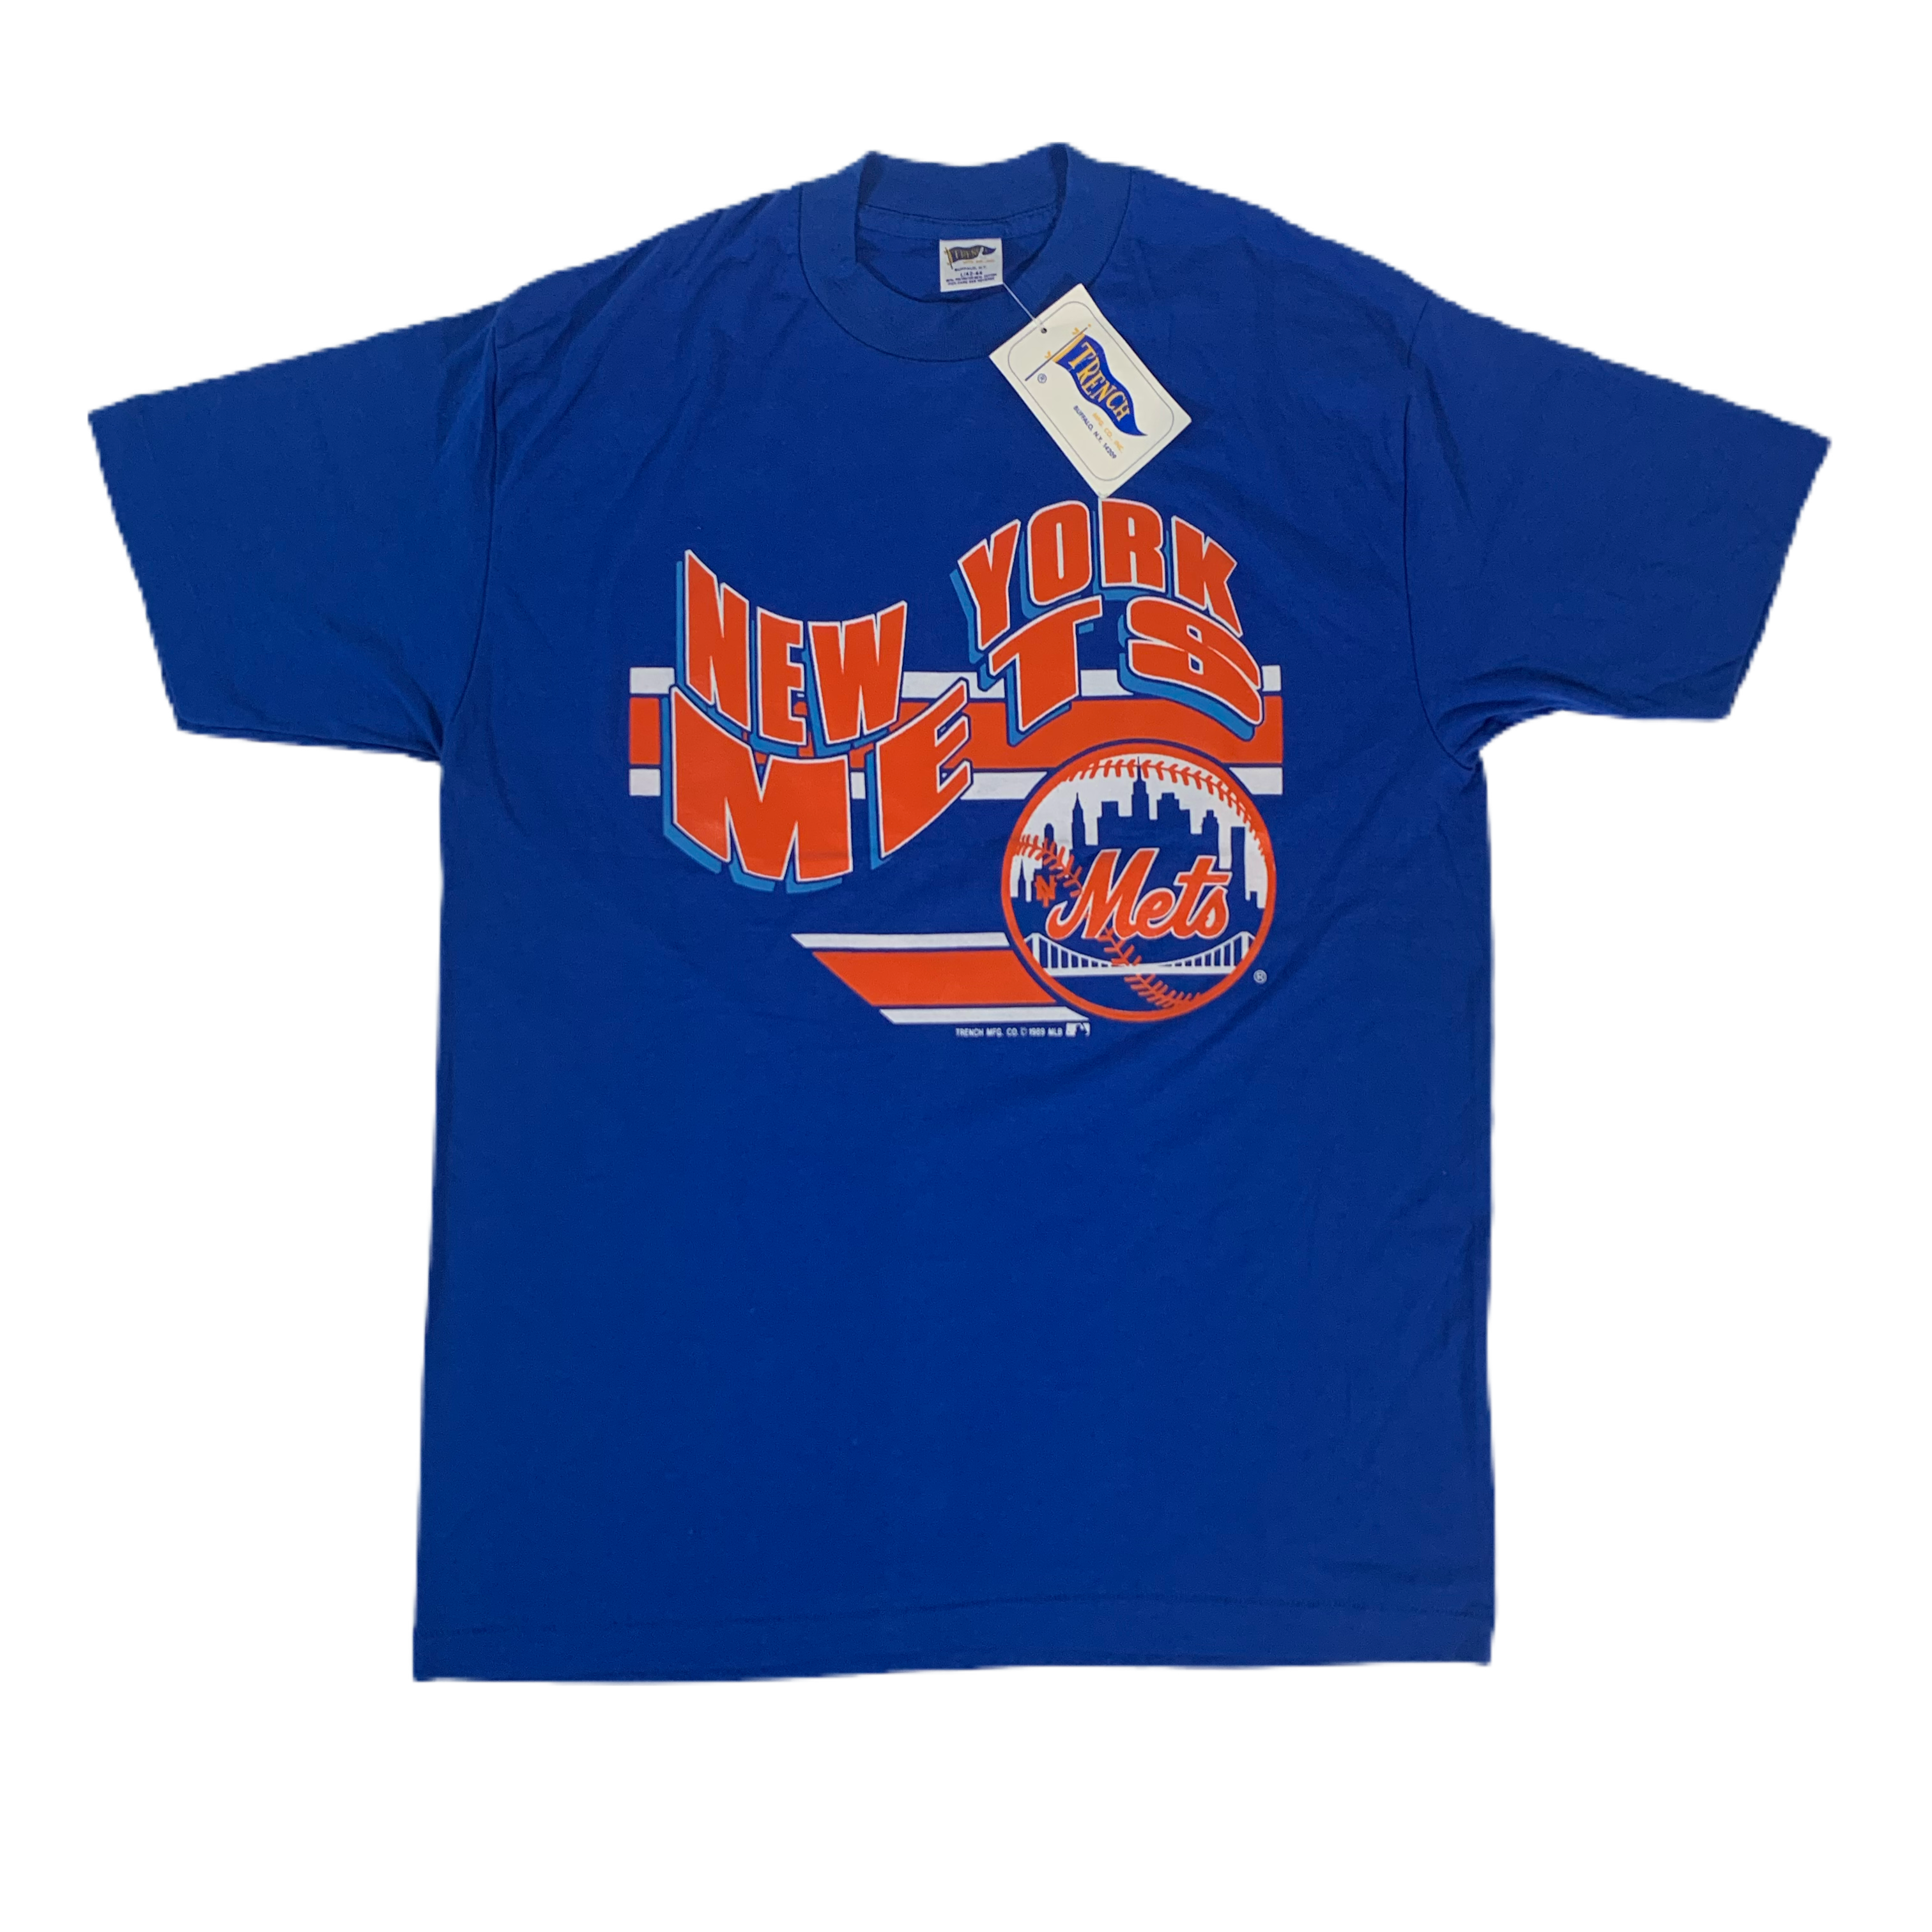 Houston Astros Grateful Dead Steal Your Face Shirt - High-Quality